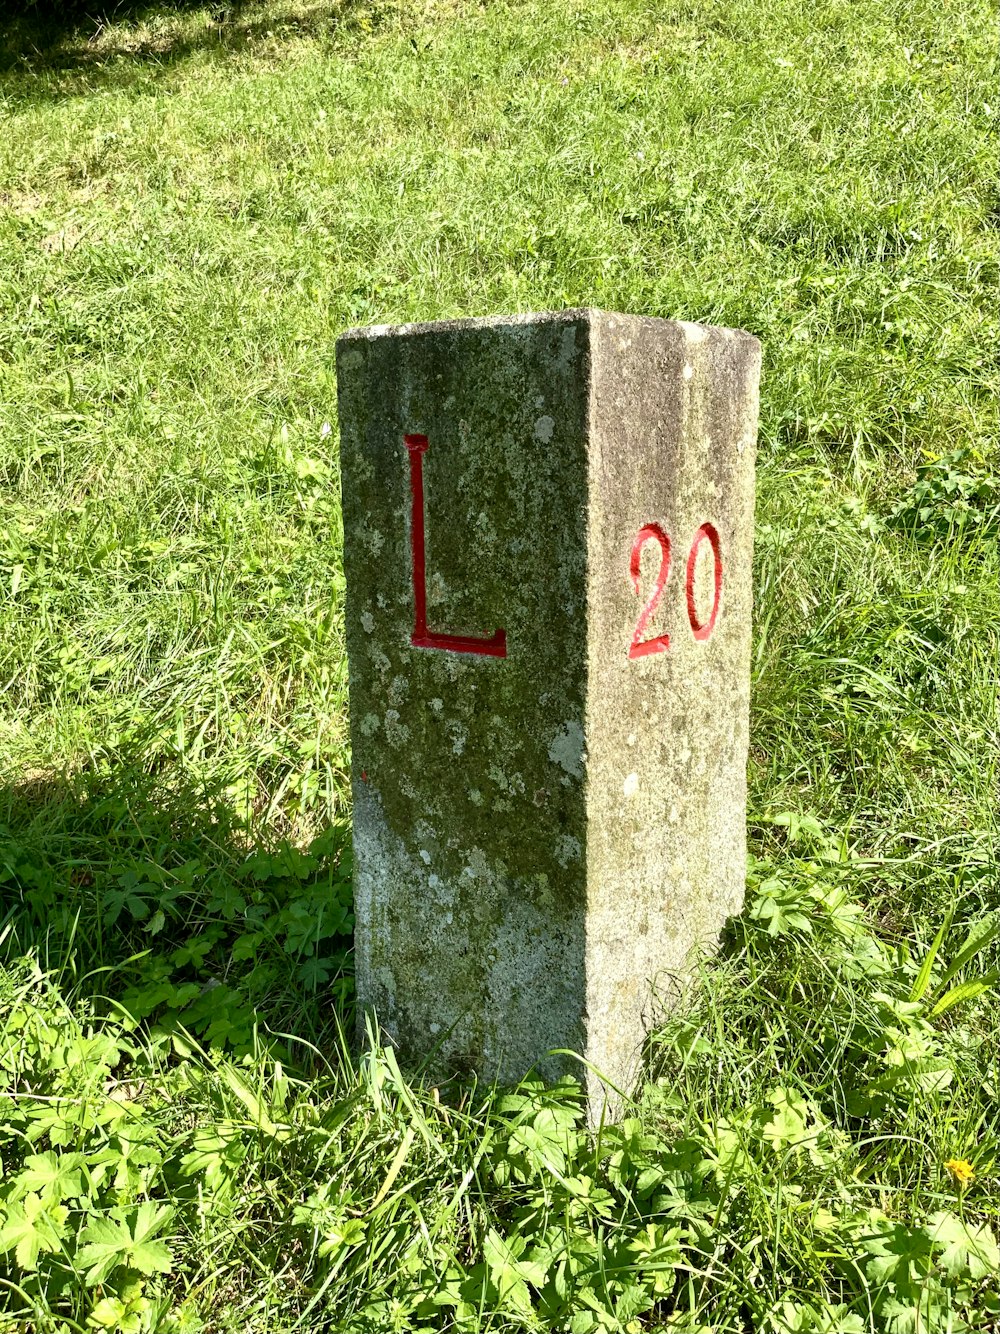 a concrete block with red and white text on it